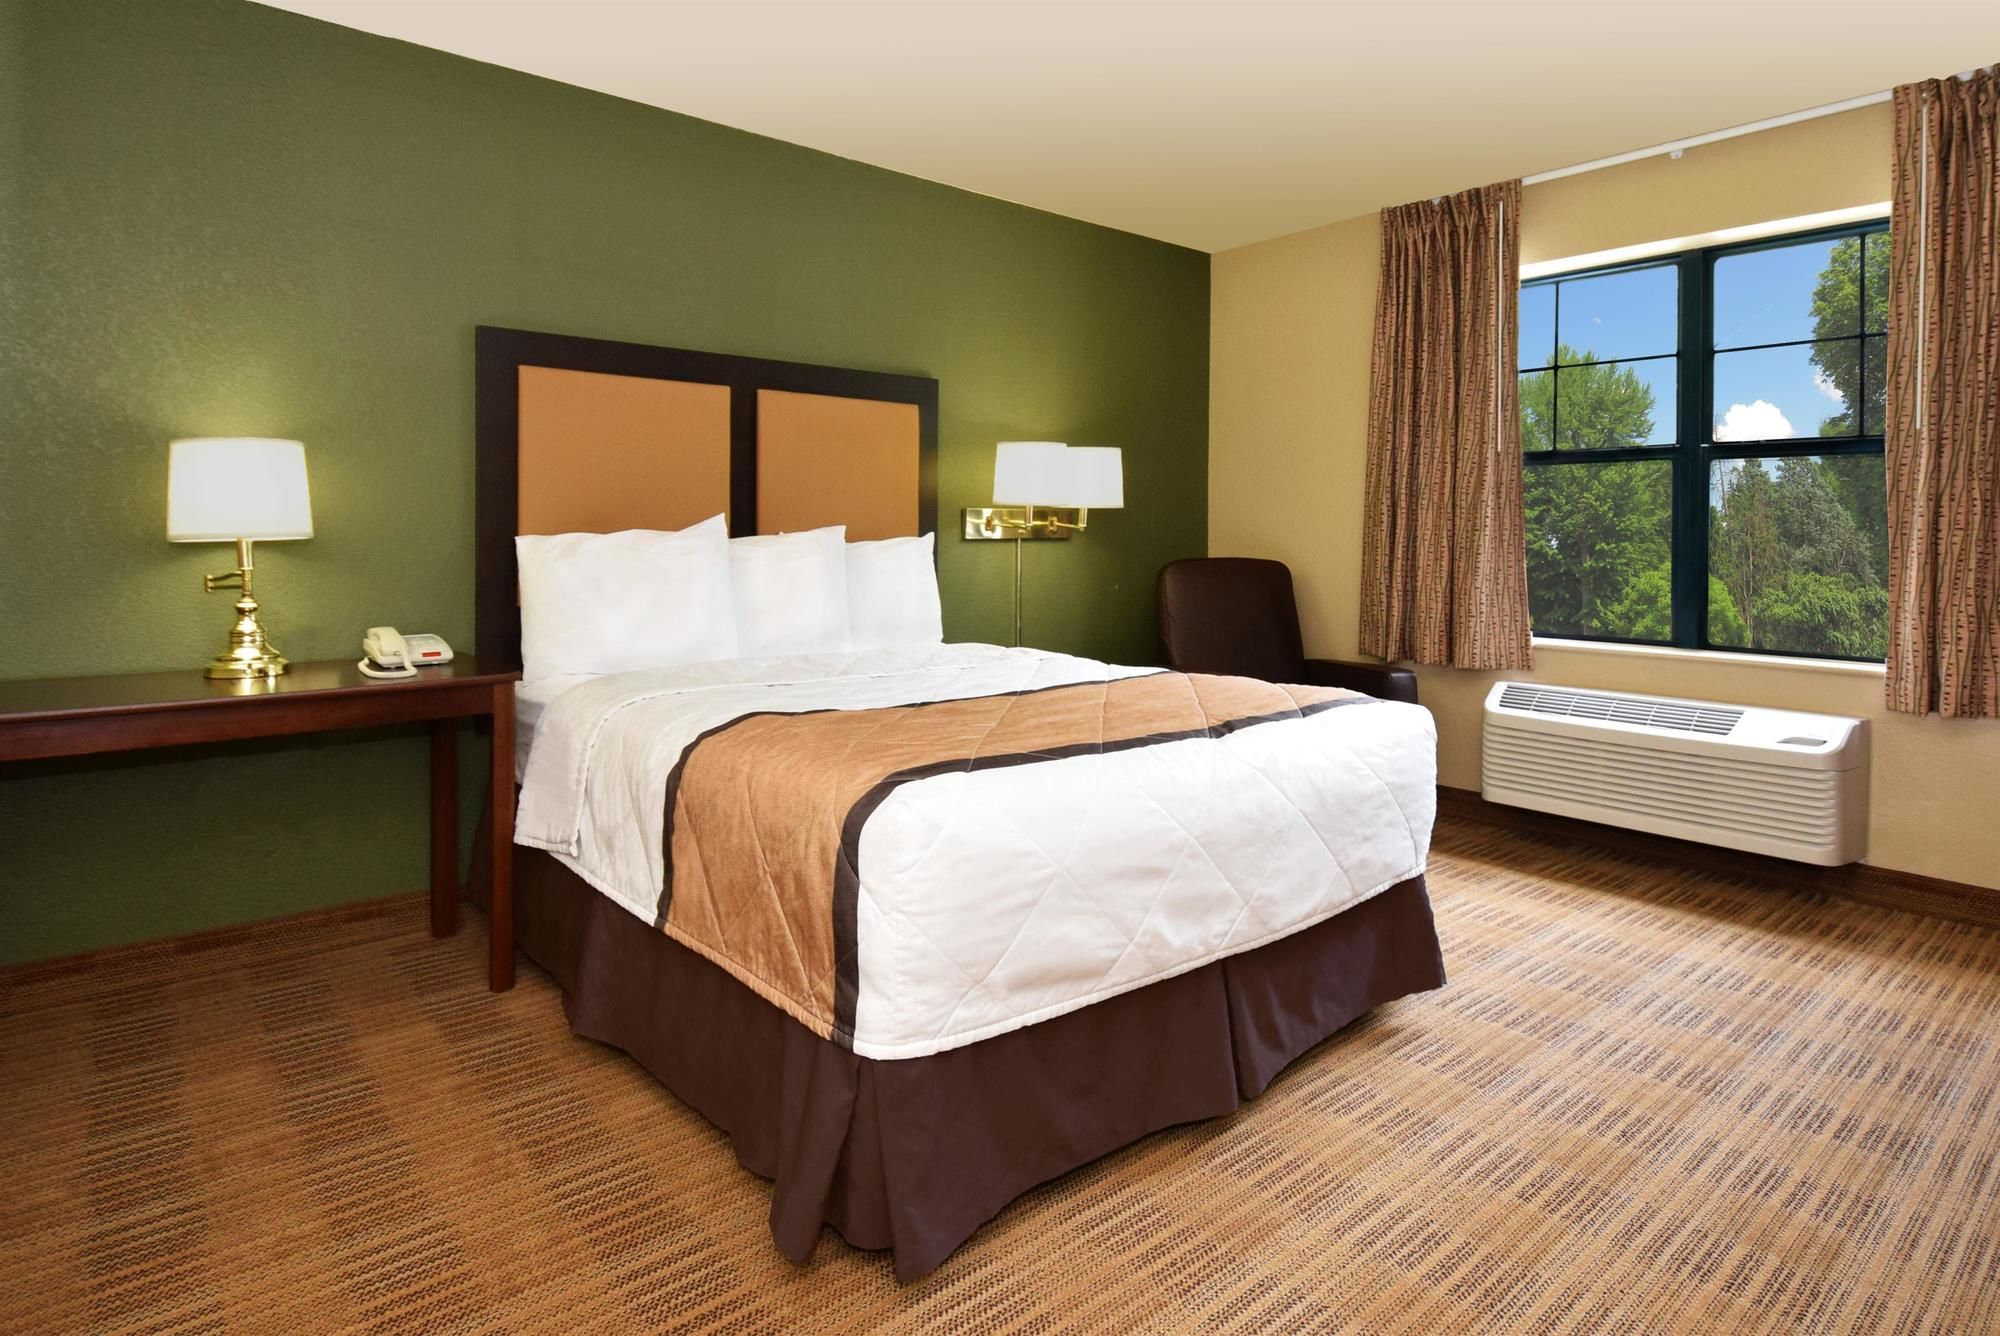 Extended Stay America Orange County Anaheim Convention Center